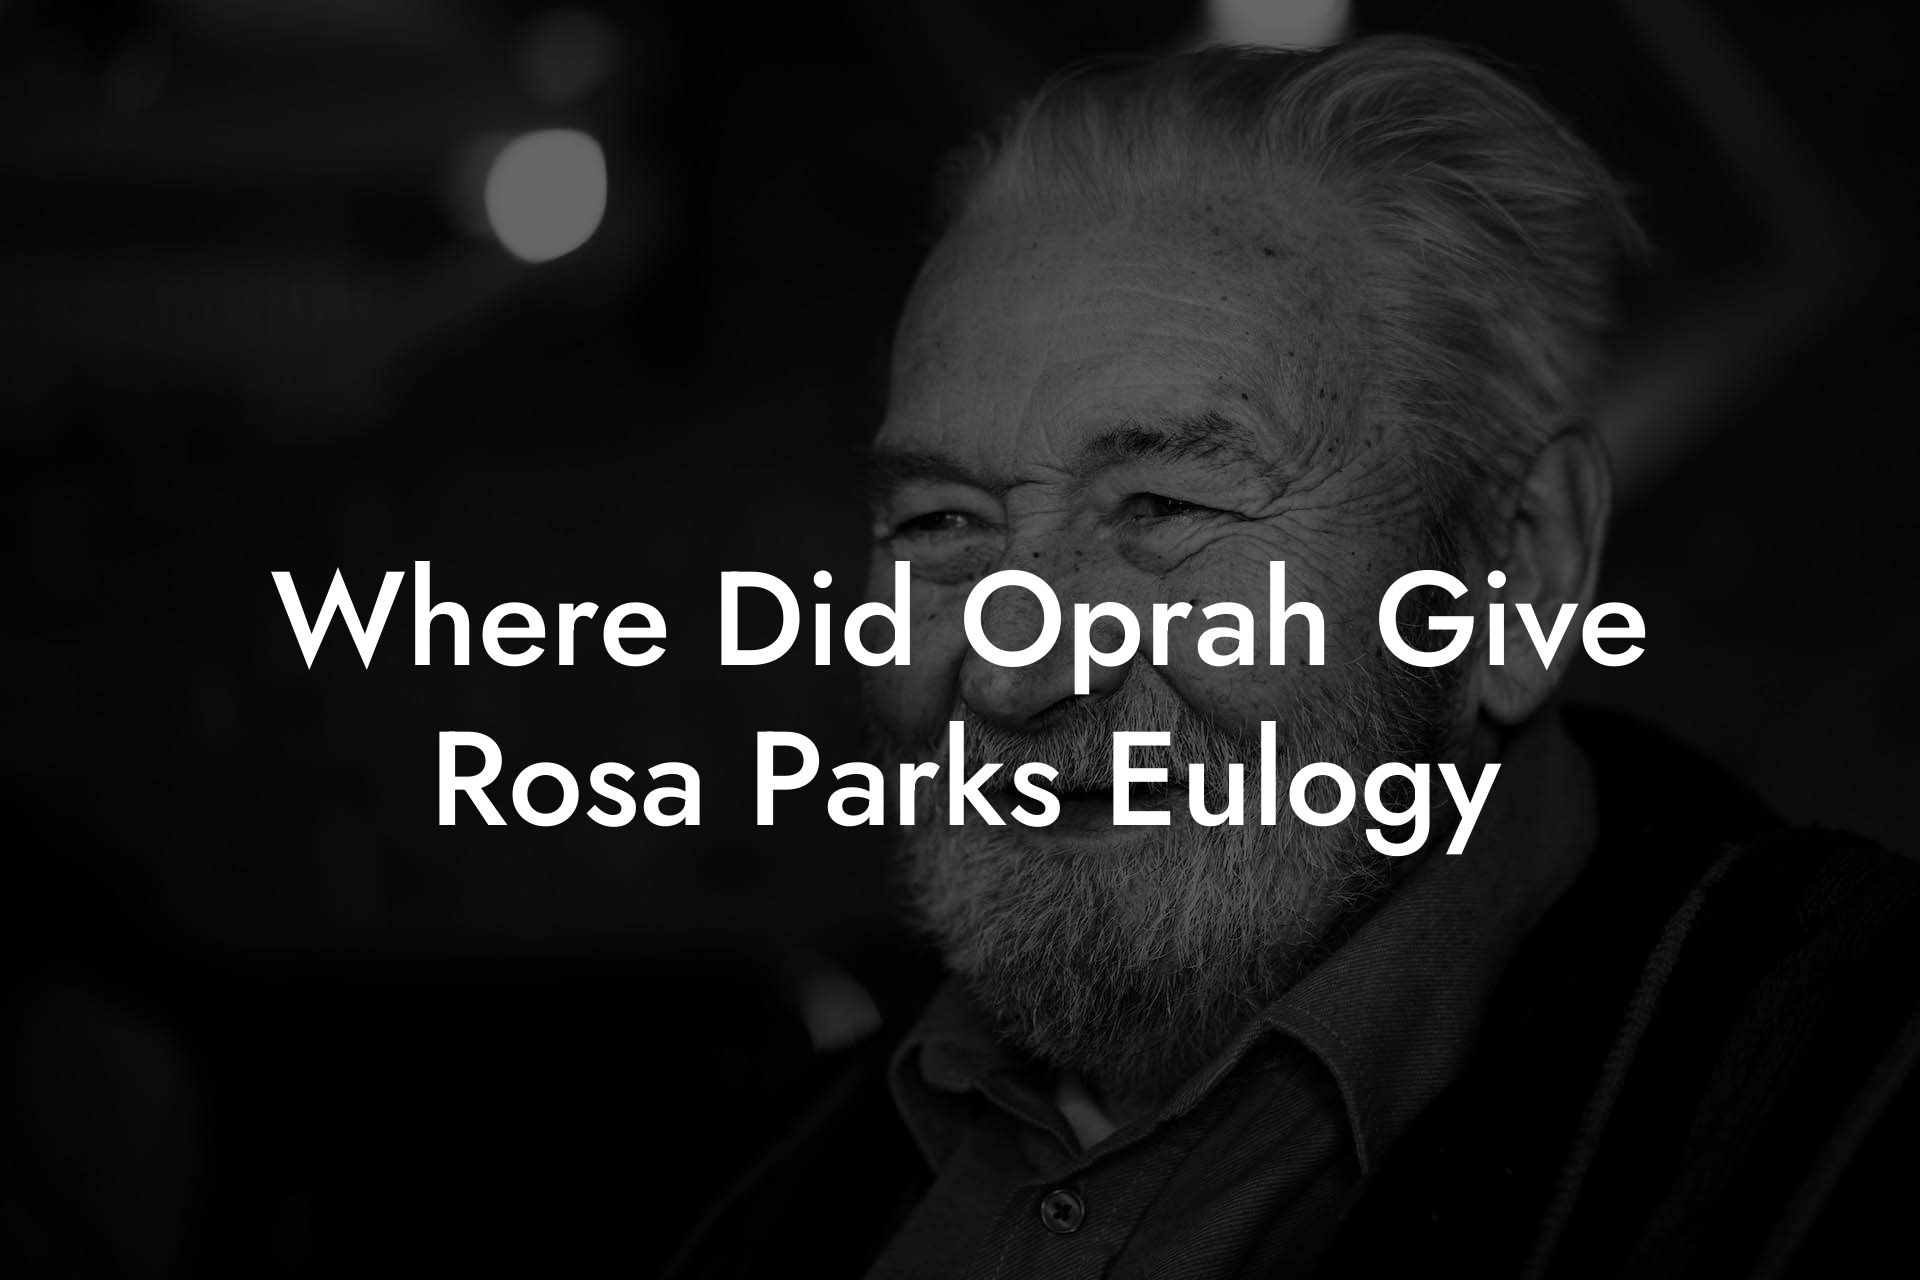 Where Did Oprah Give Rosa Parks Eulogy